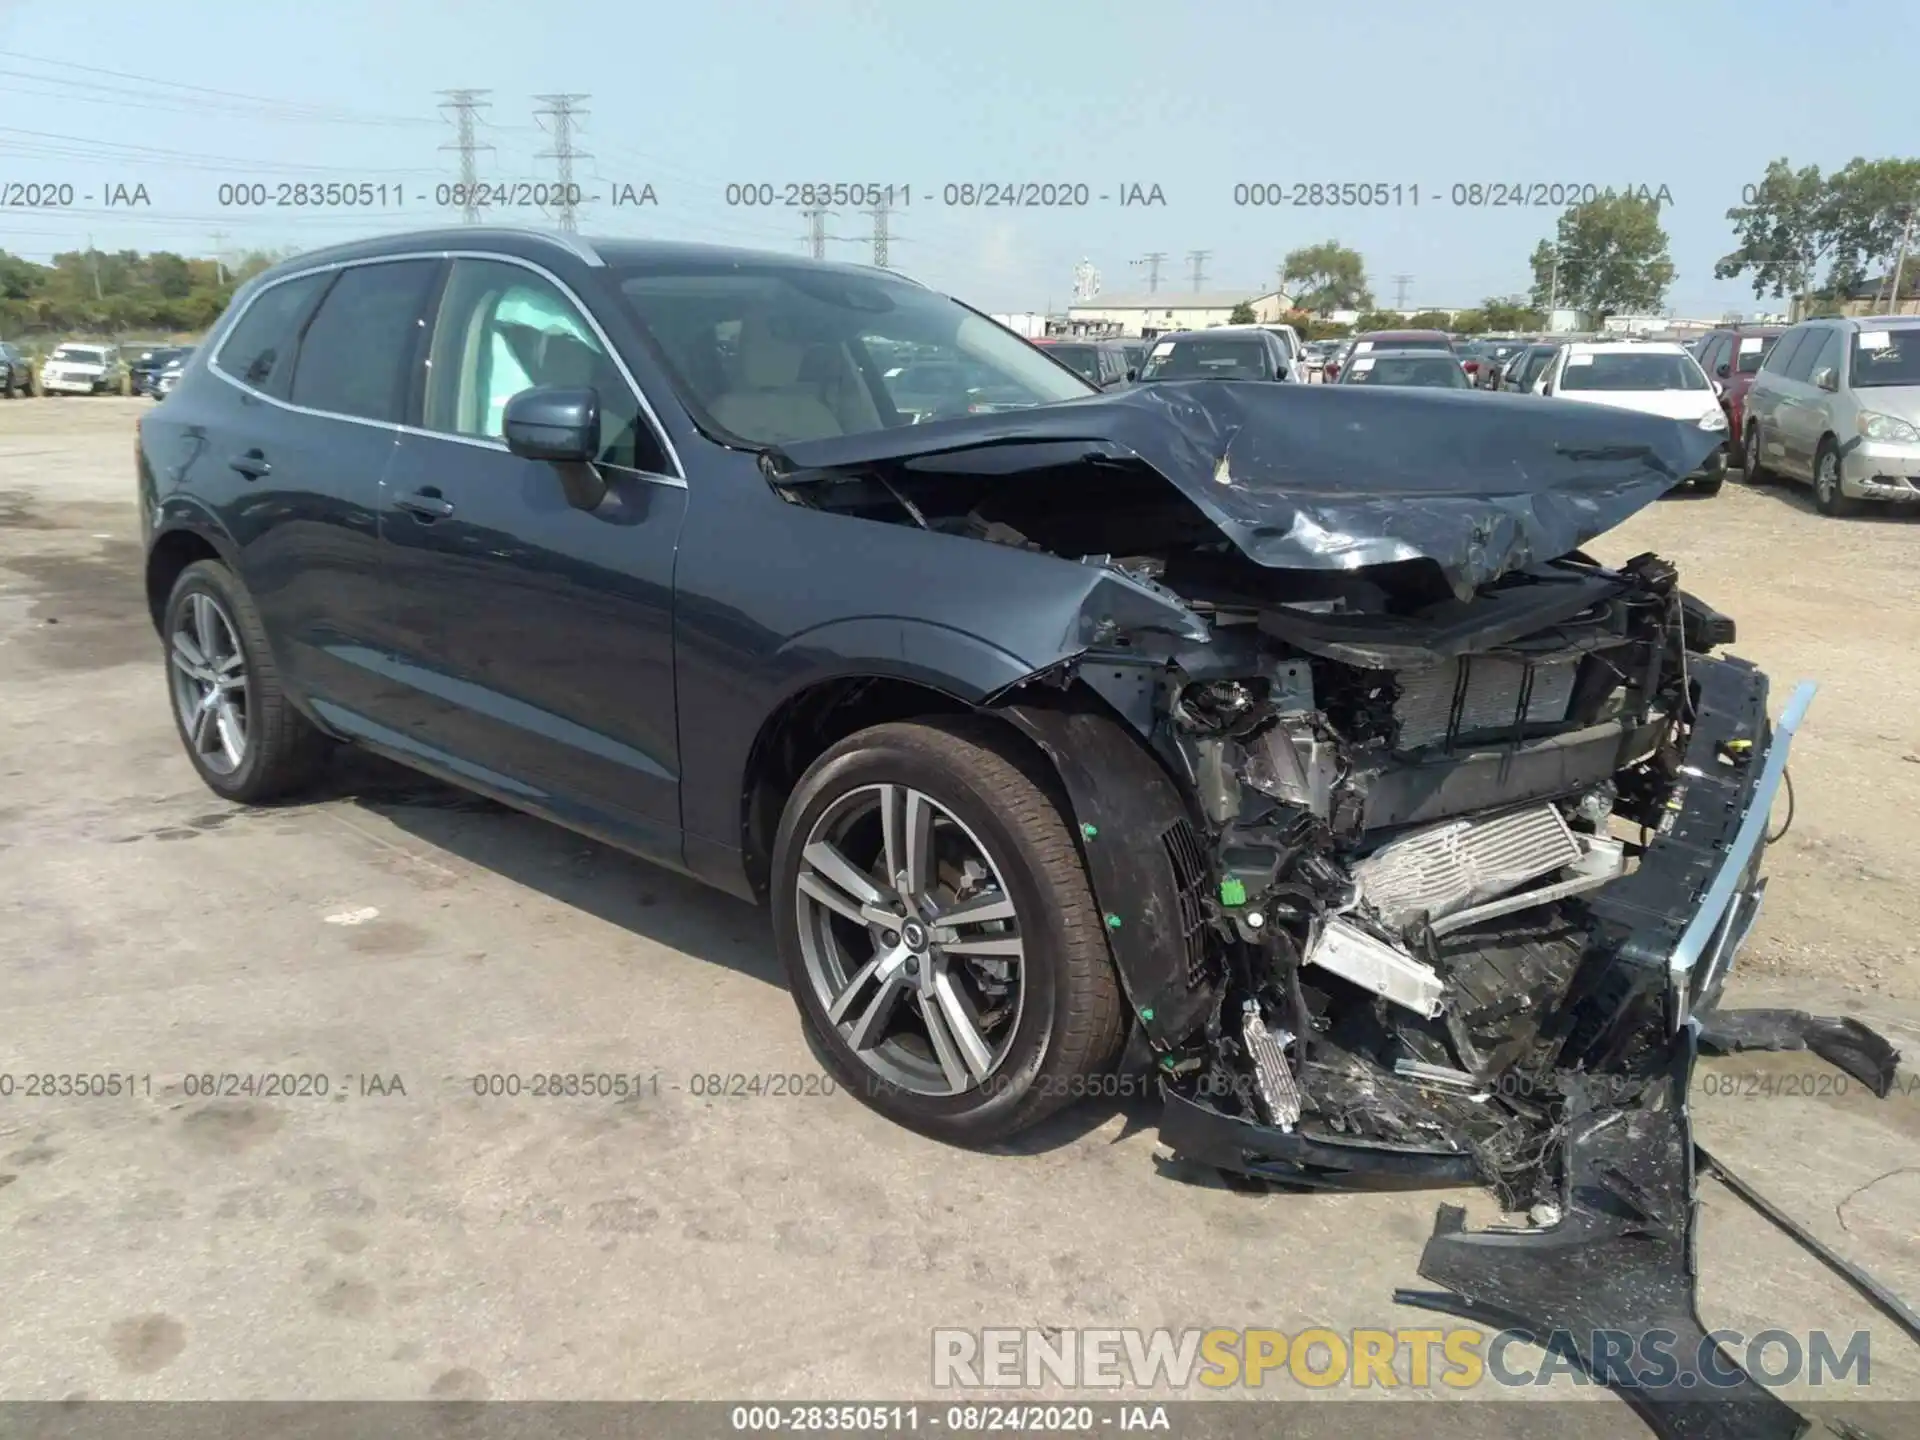 1 Photograph of a damaged car YV4A22RK8L1482842 VOLVO XC60 2020